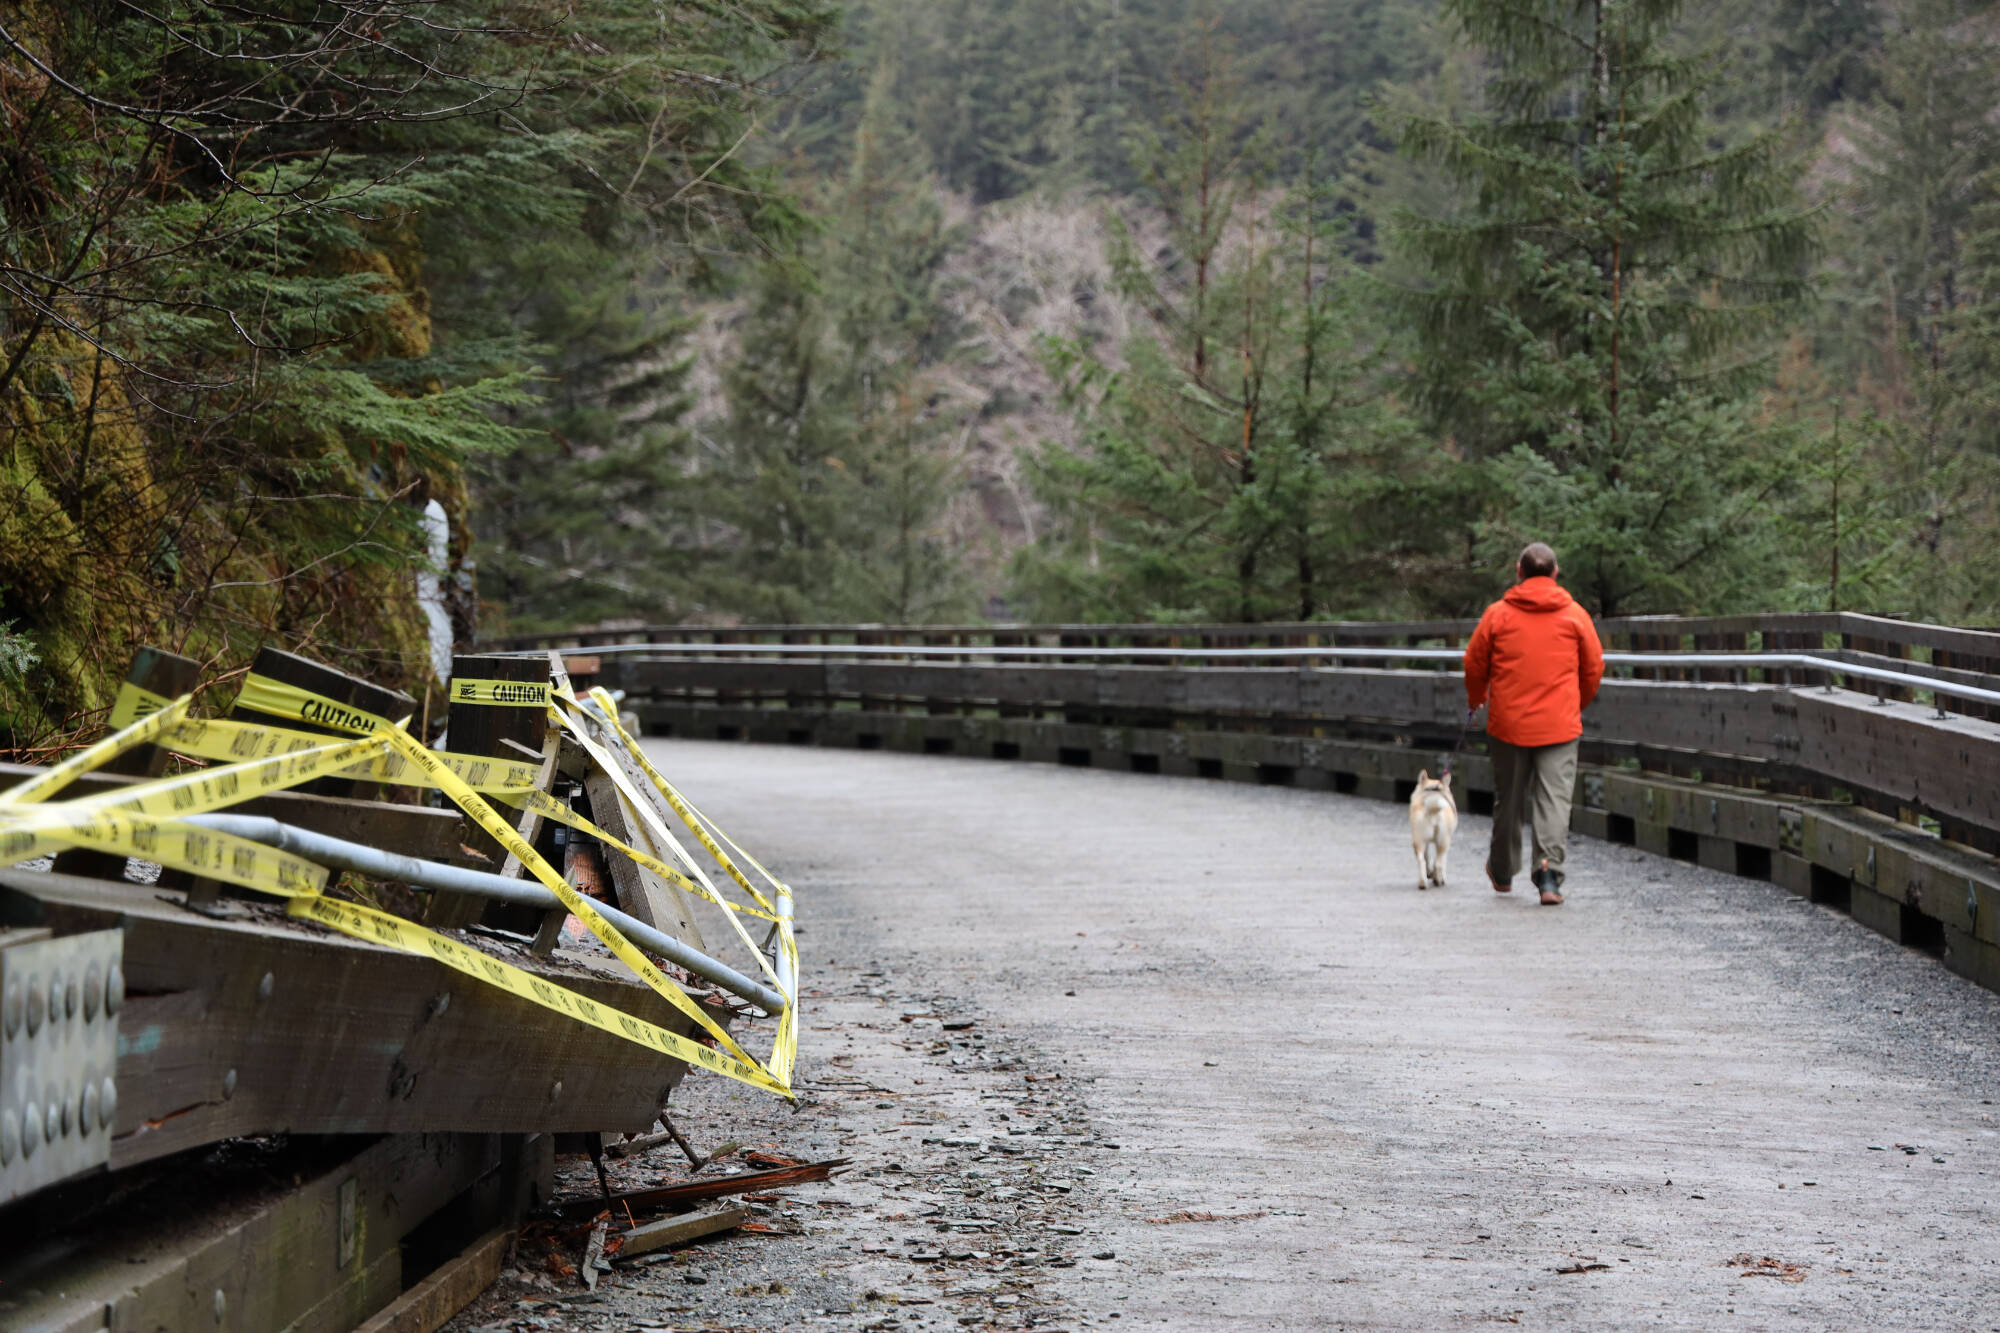 A resident and his dog walk past the taped off portion of the Basin Road Trestle after it suffered damaged from a rockslide earlier this week. The trestle is open to pedestrians, but will remain closed to vehicular traffic until structural repairs are made, according to city officials. (Clarise Larson / Juneau Empire)